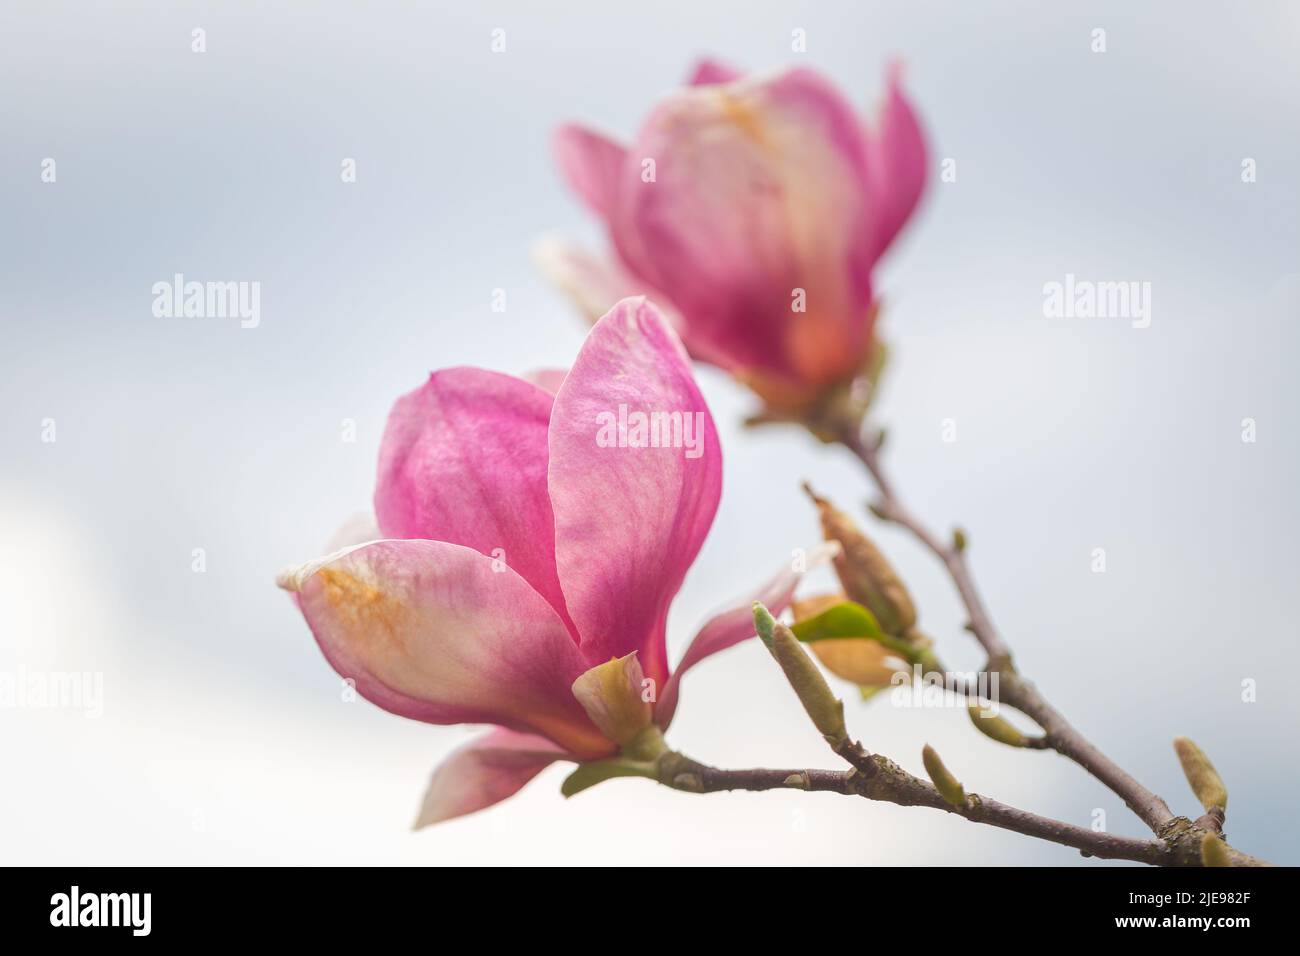 Magnolia soulangeana, blossomed magnolia tree, flower in close-up view on a blurred background. Stock Photo